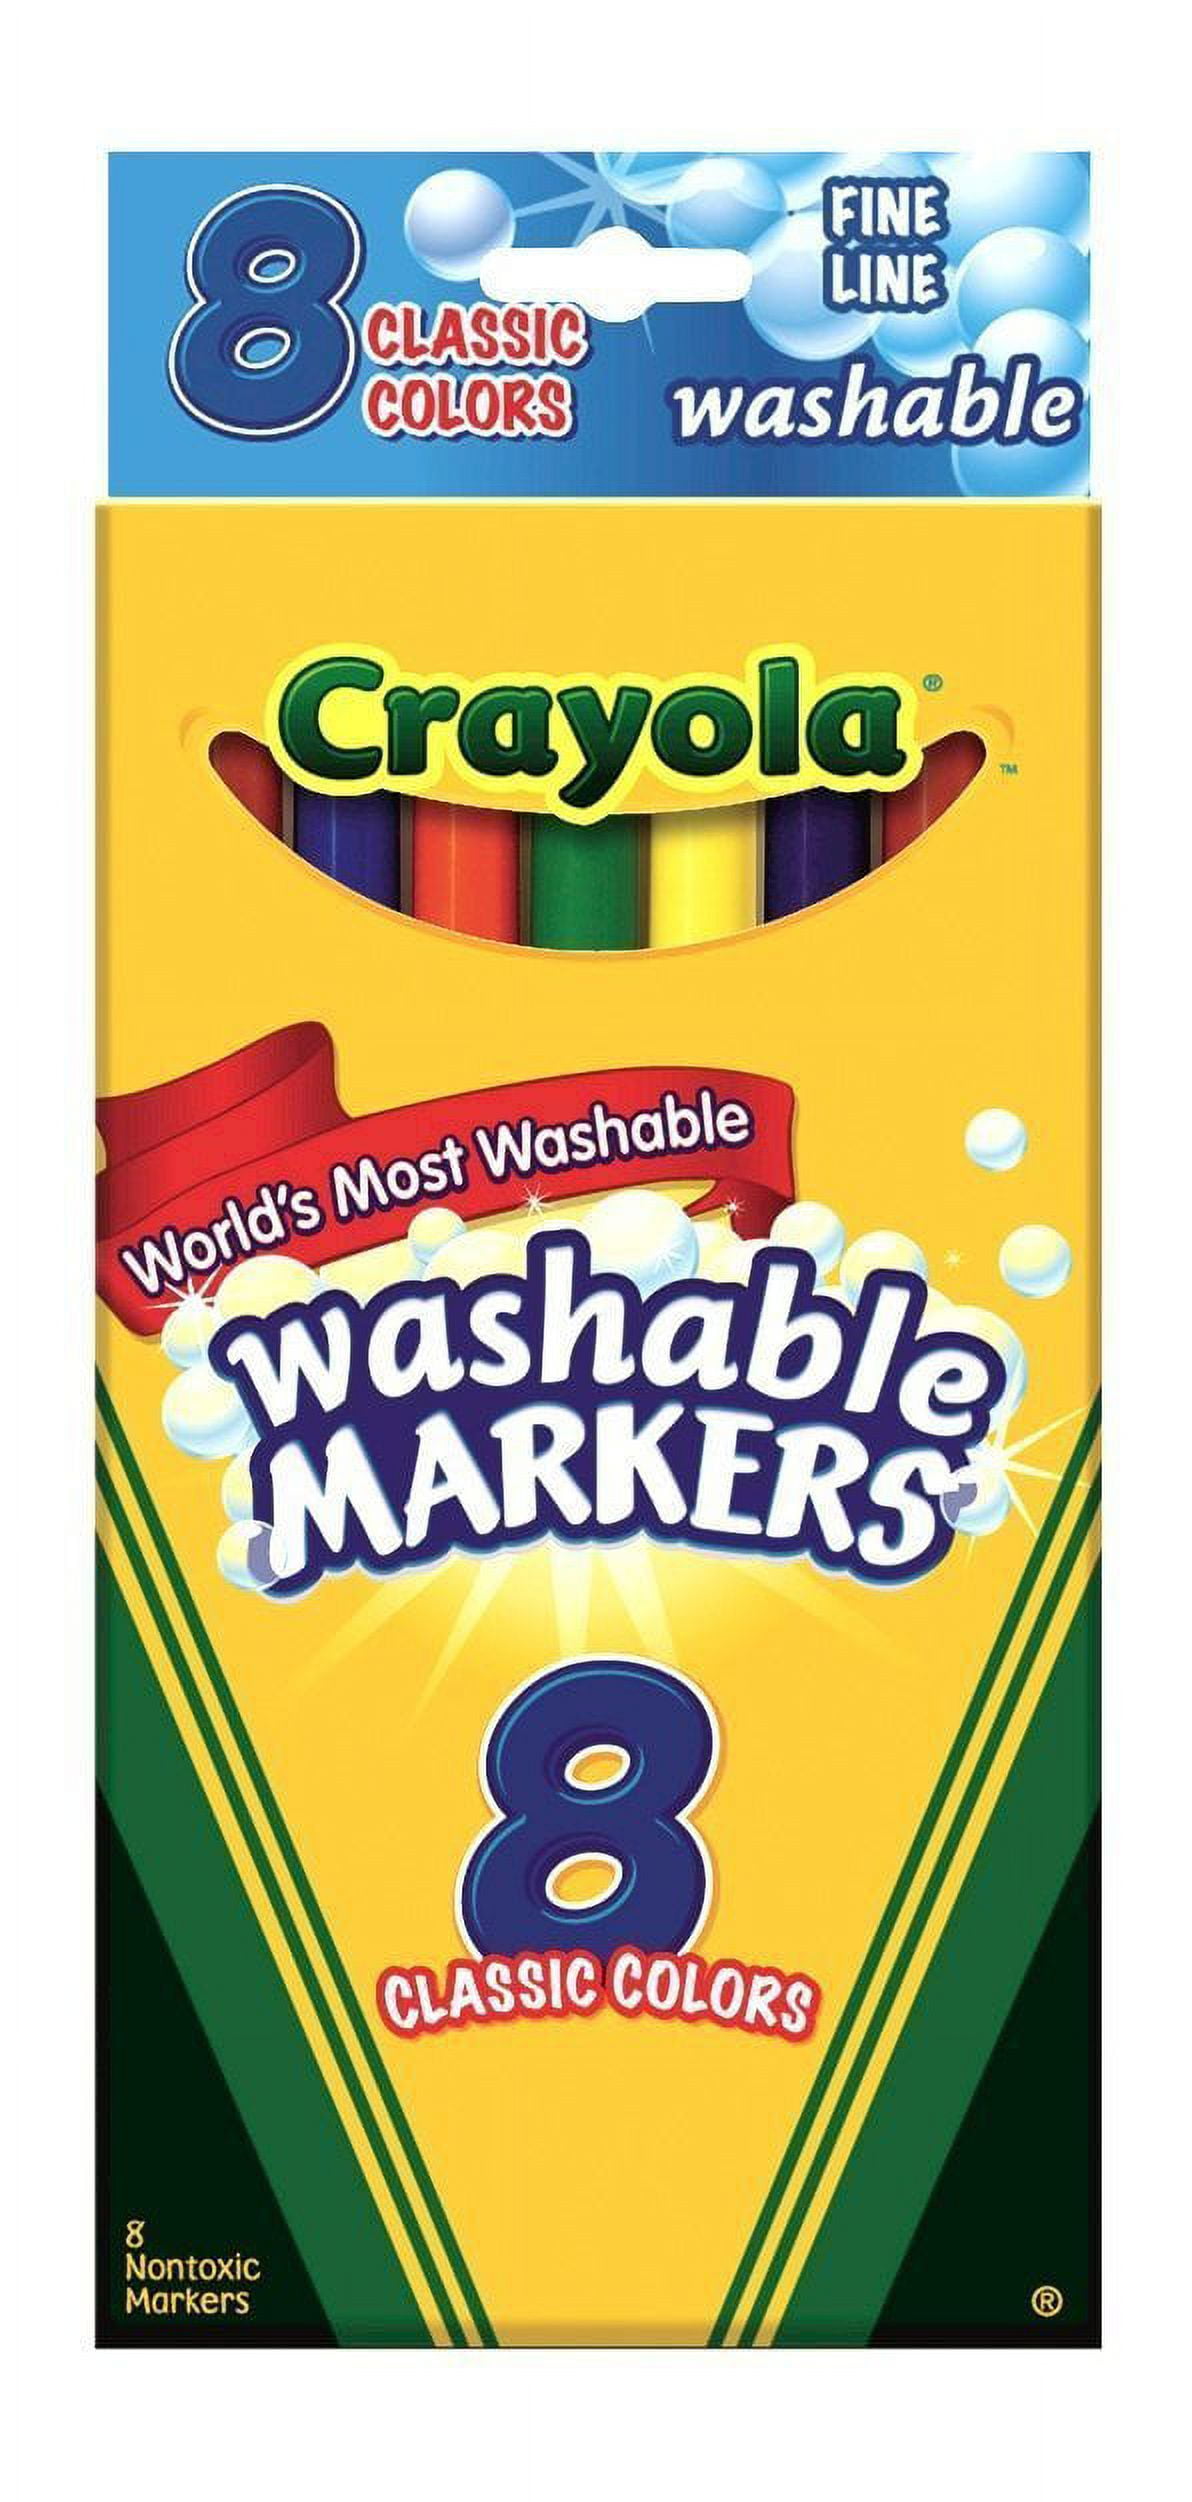 Crayola® Ultra-Clean Washable Color Markers, Thin Line, Assorted Classic  Colors, Box Of 8 - Zerbee